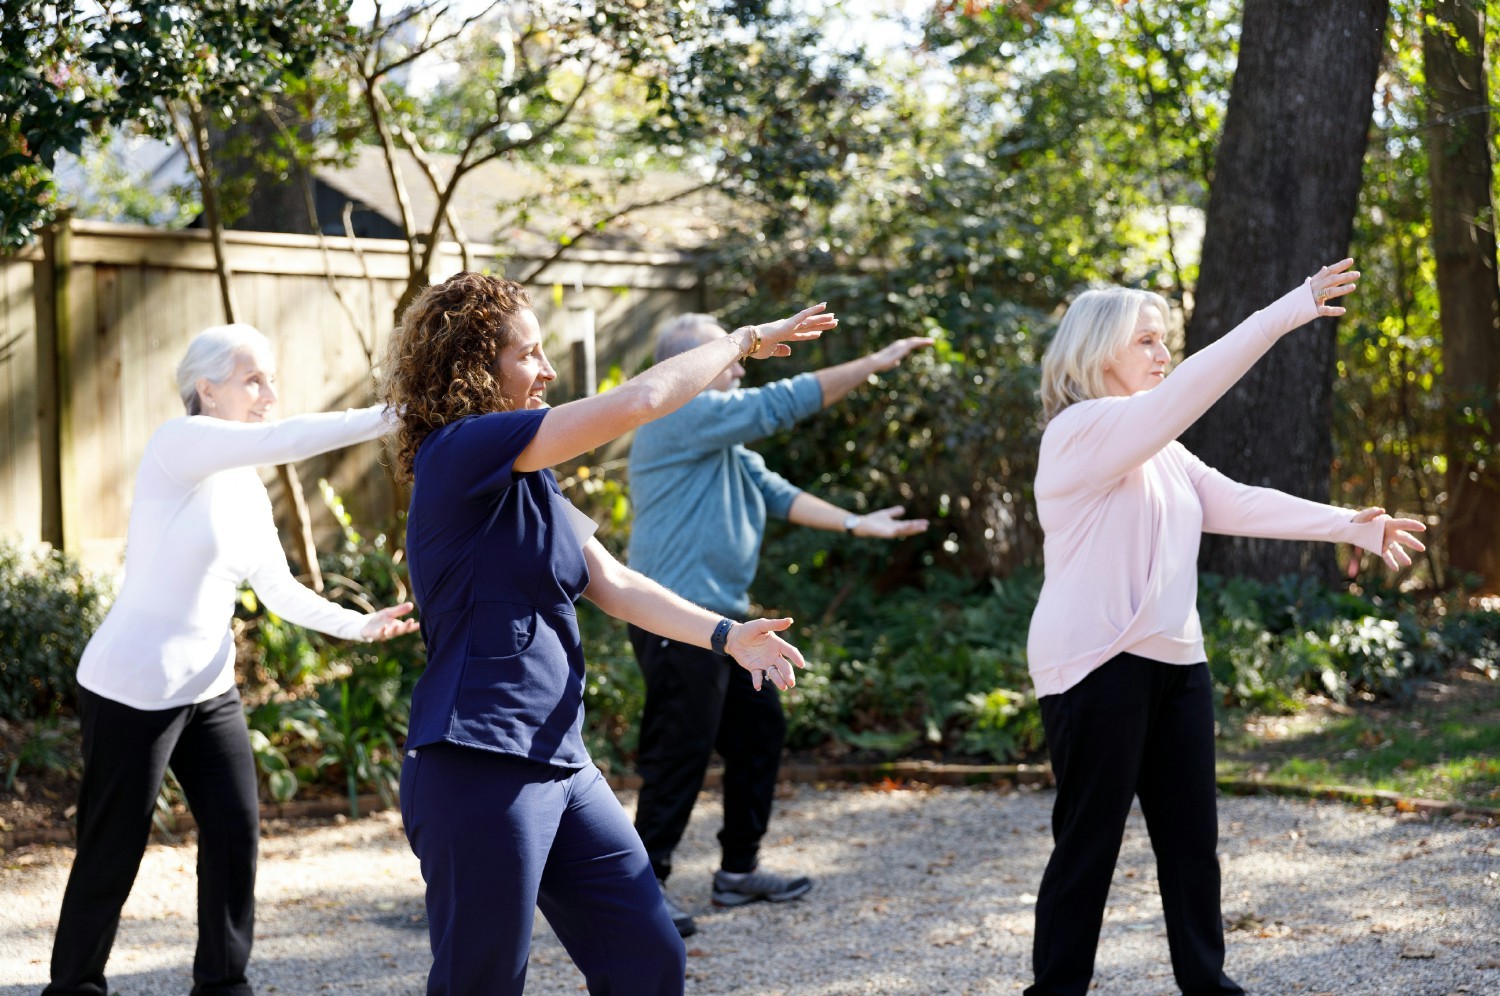 Therapy staff and fitness experts support our clients in living active, independent lifestyles.